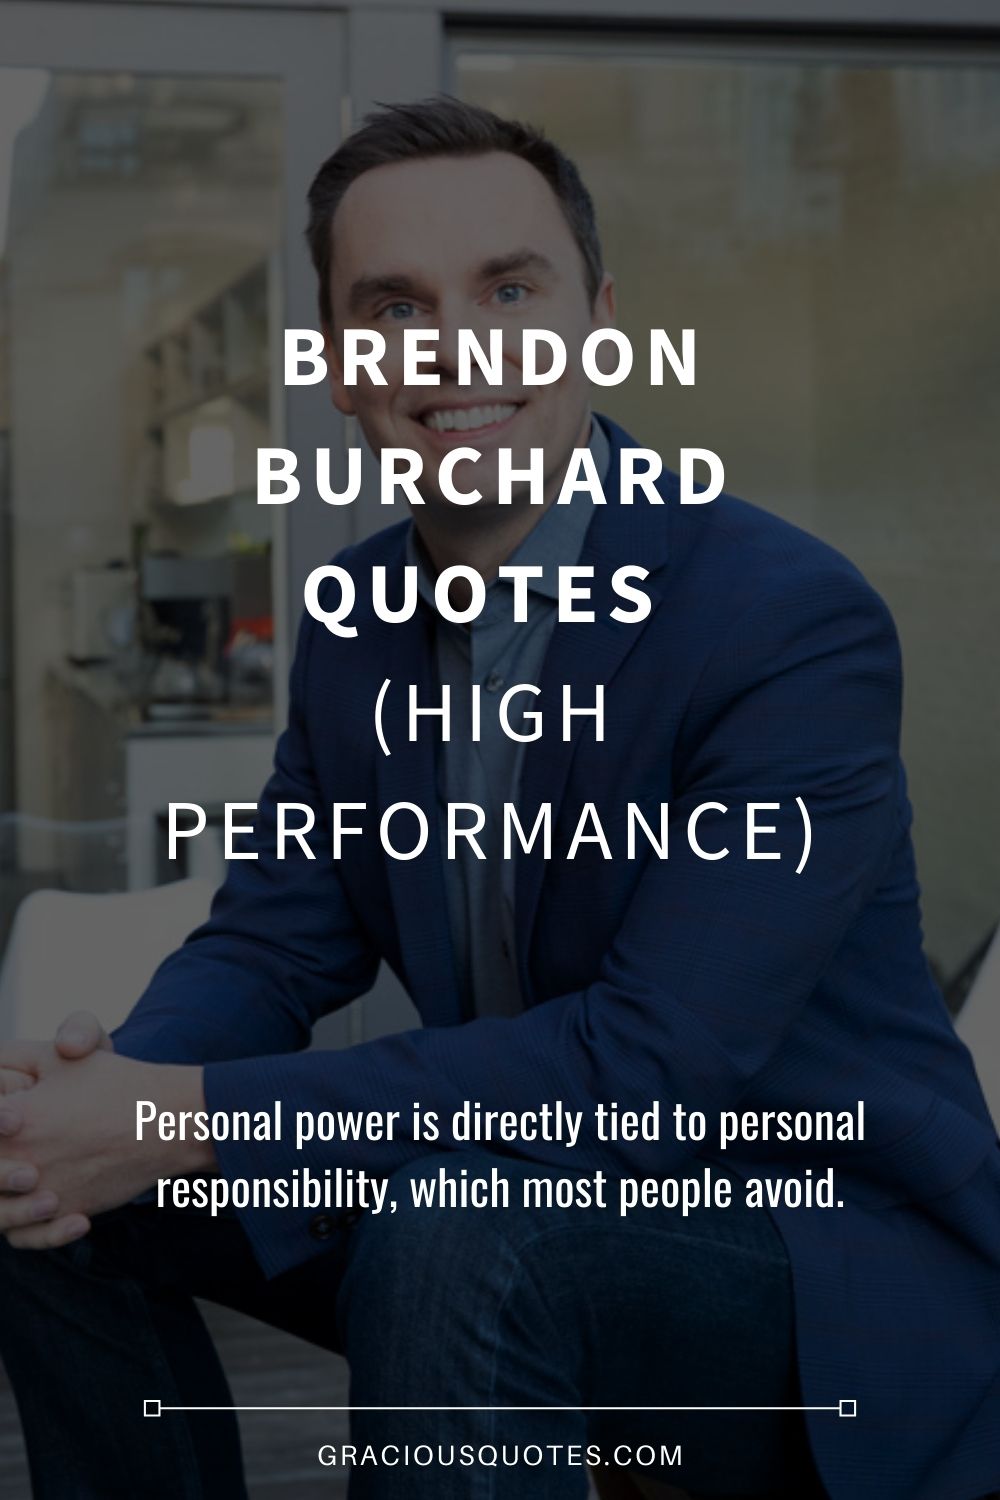 Brendon Burchard Quotes (HIGH PERFORMANCE) - Gracious Quotes